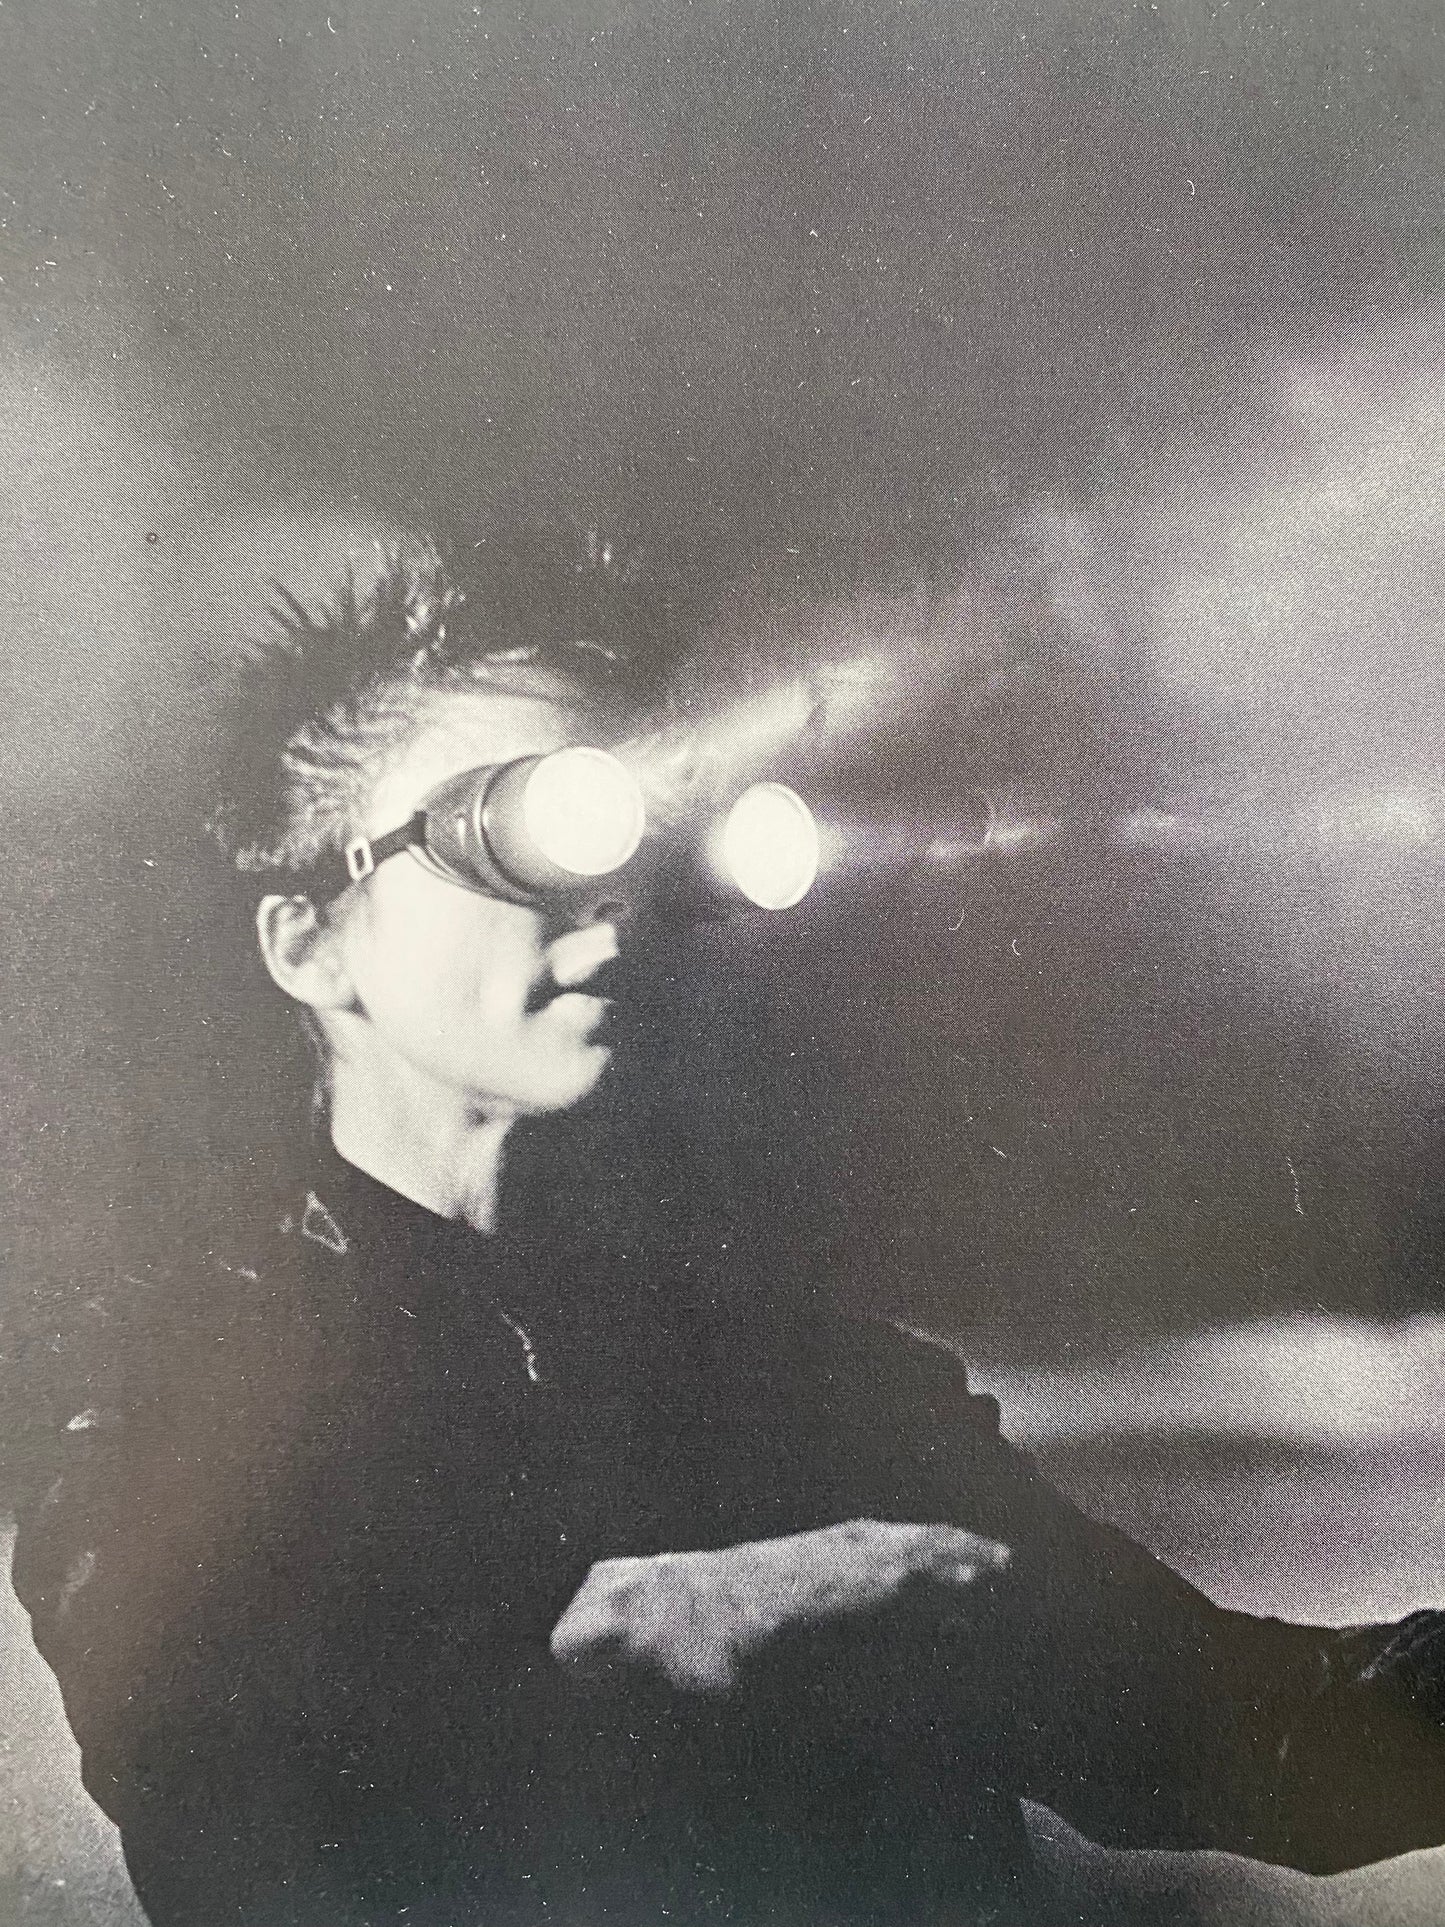 Laurie Anderson - United States (1984)